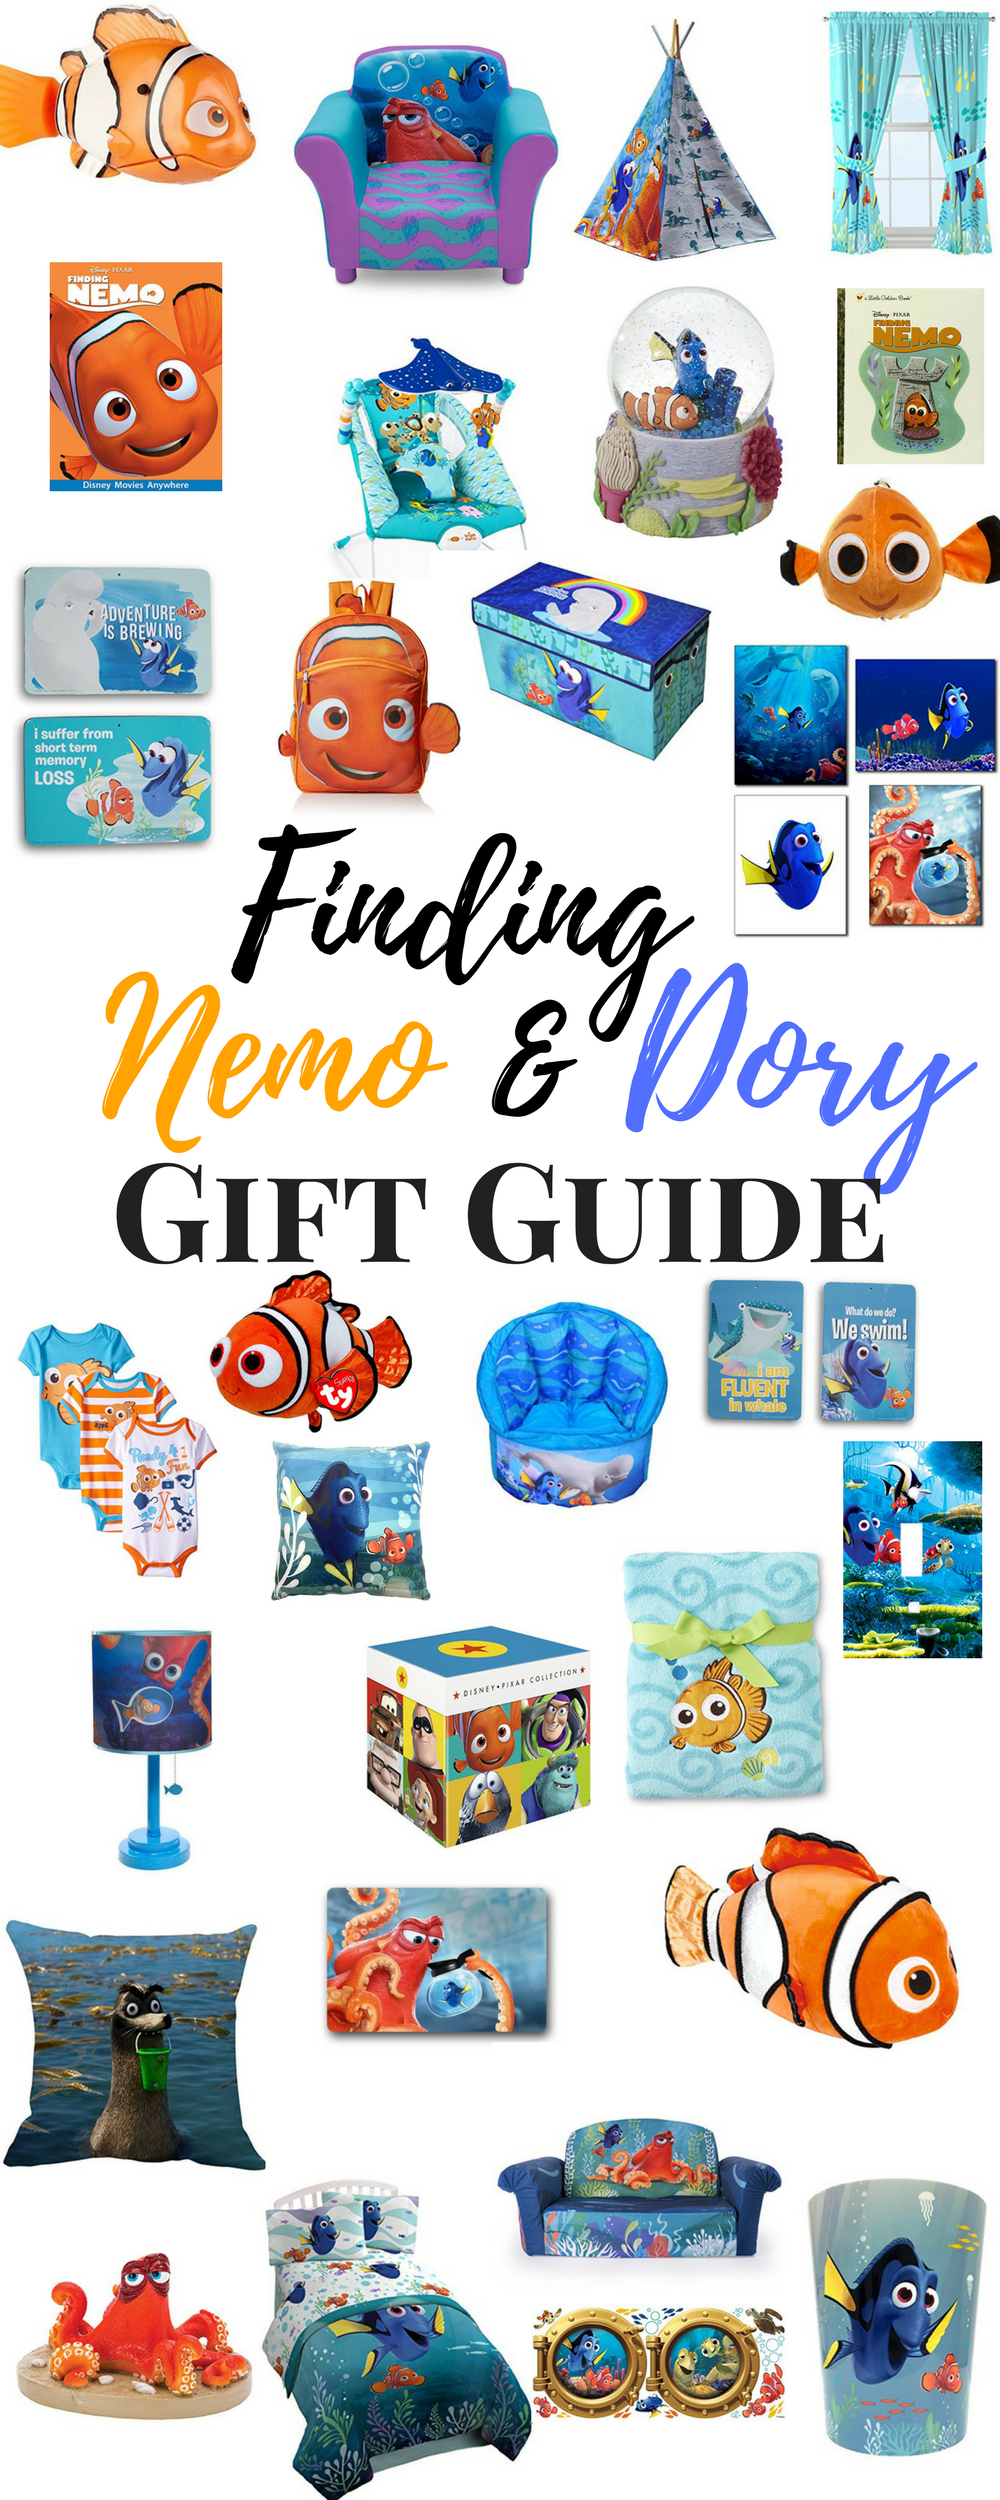  Finding Nemo Gift Ideas - Finding Dory Gift Ideas Whether you're looking Finding Nemo Party Ideas, Finding Dory party ideas, decorating a room in Finding Nemo, or just looking for the perfect Finding Nemo Gift Ideas, here is a list of some of our favorites! 